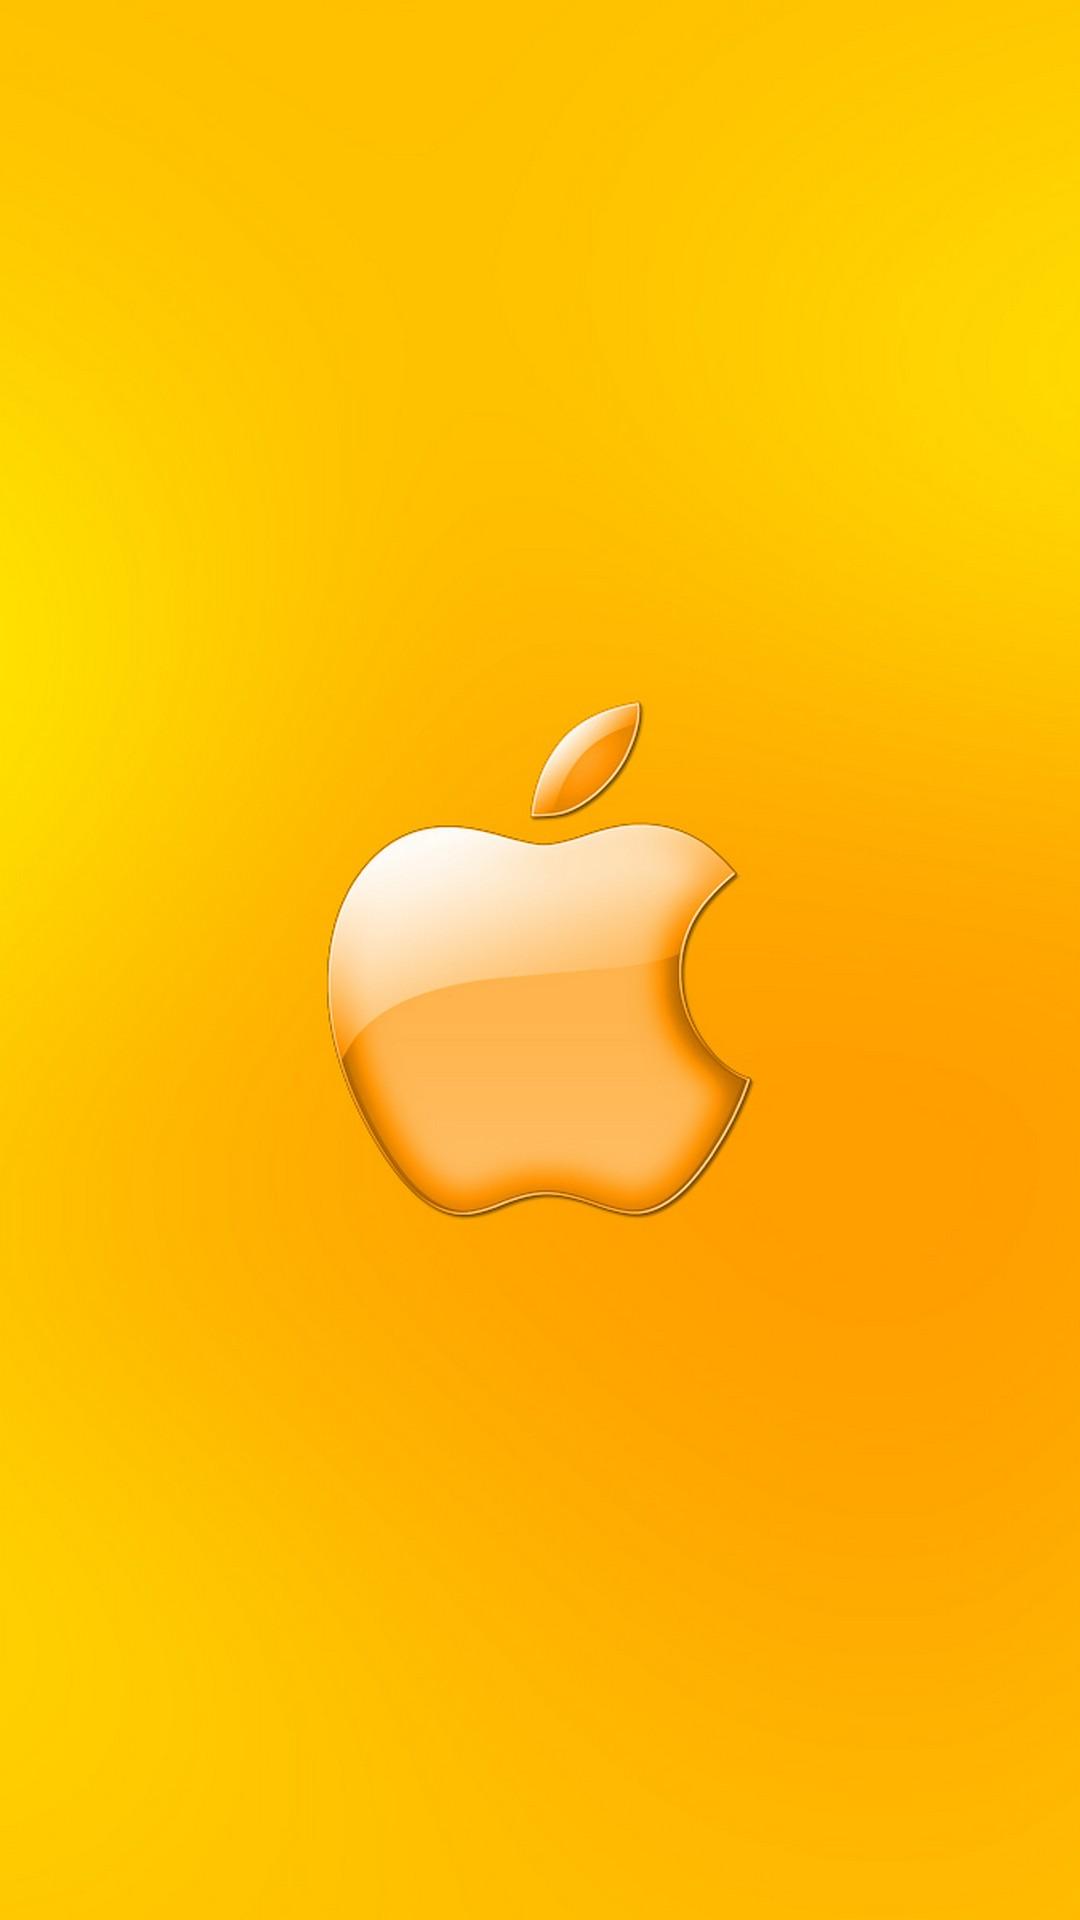 Apple Gold Logo For Android Wallpaper Android Wallpaper